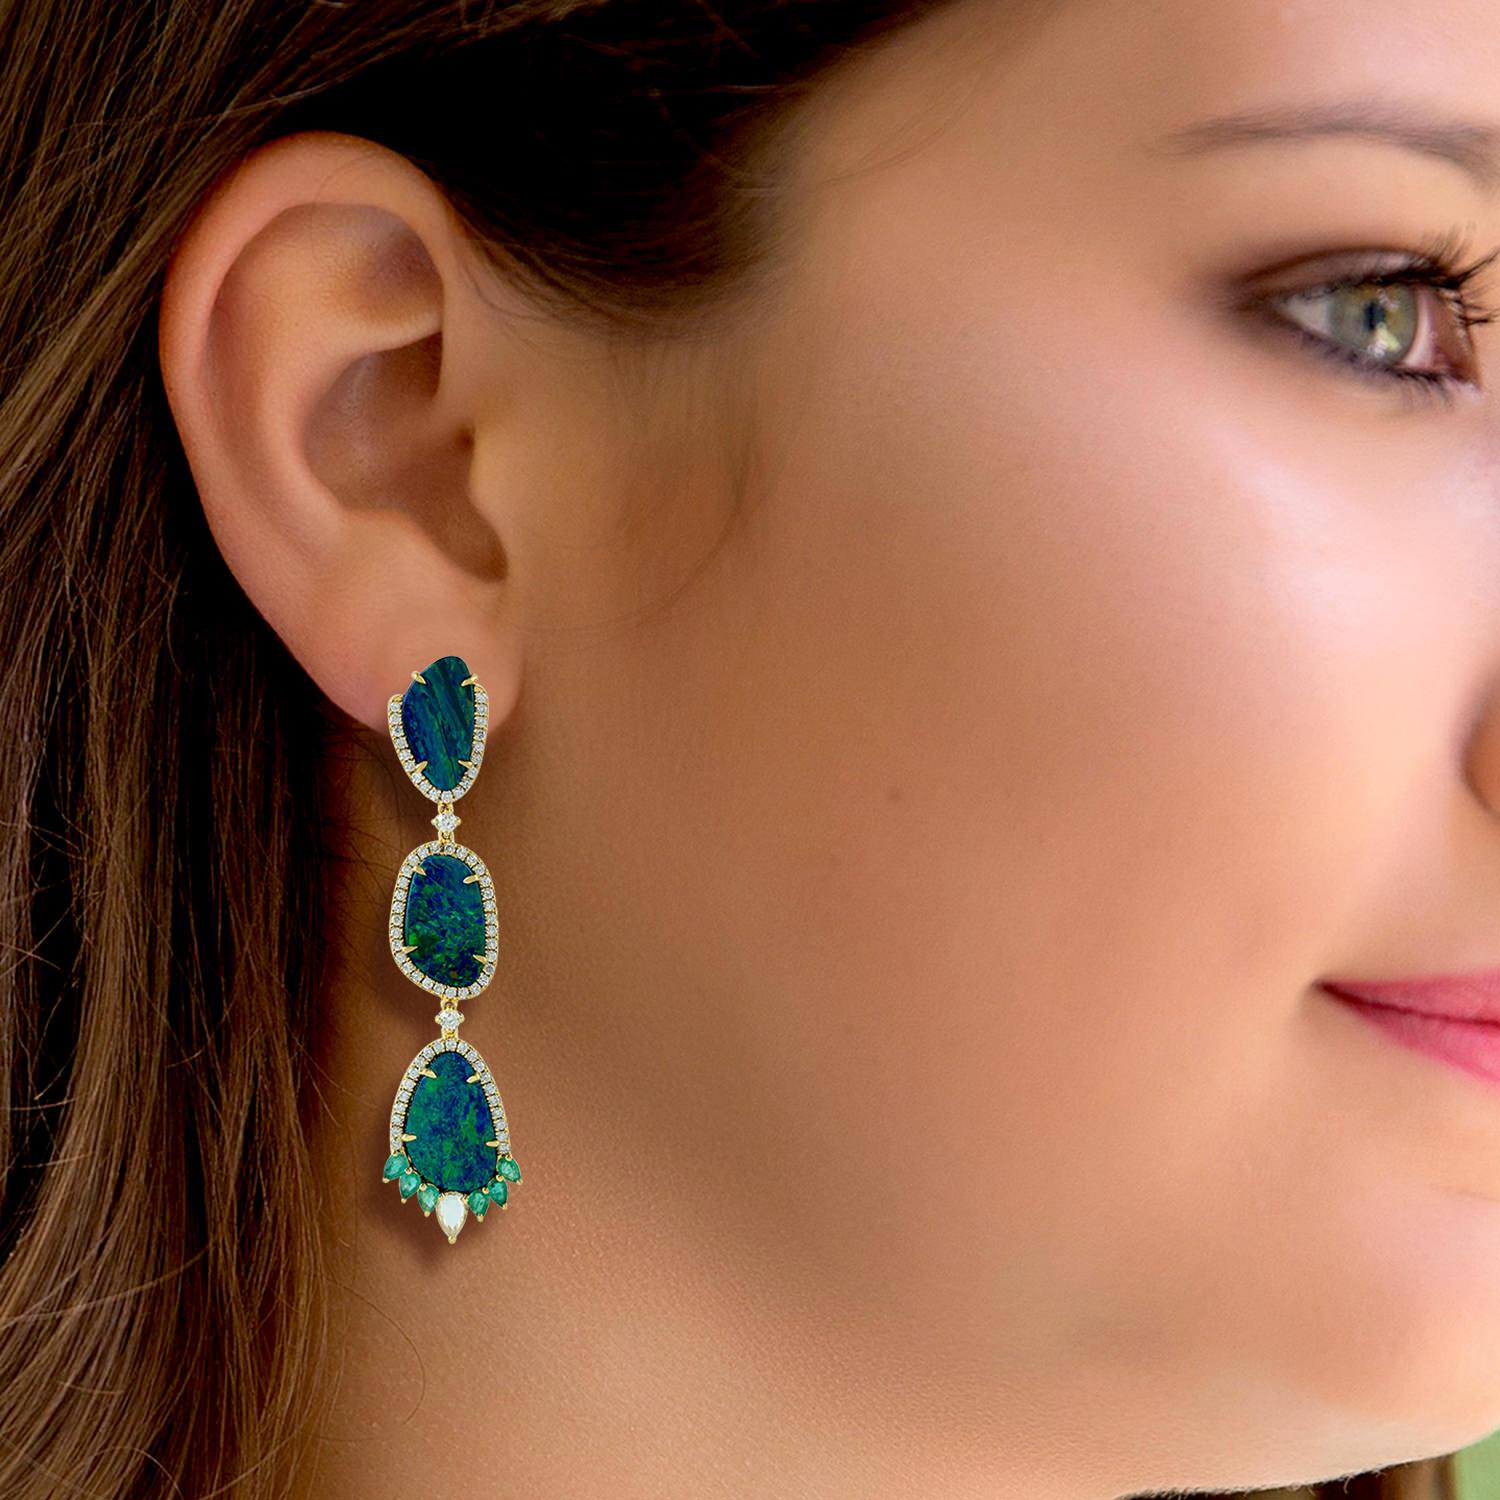 Cast in 18 karat gold. These stud earrings are hand set in 11.2 carats opal doublet, .84 carats emerald and 1.28 carats of sparkling diamonds. 

FOLLOW MEGHNA JEWELS storefront to view the latest collection & exclusive pieces. Meghna Jewels is